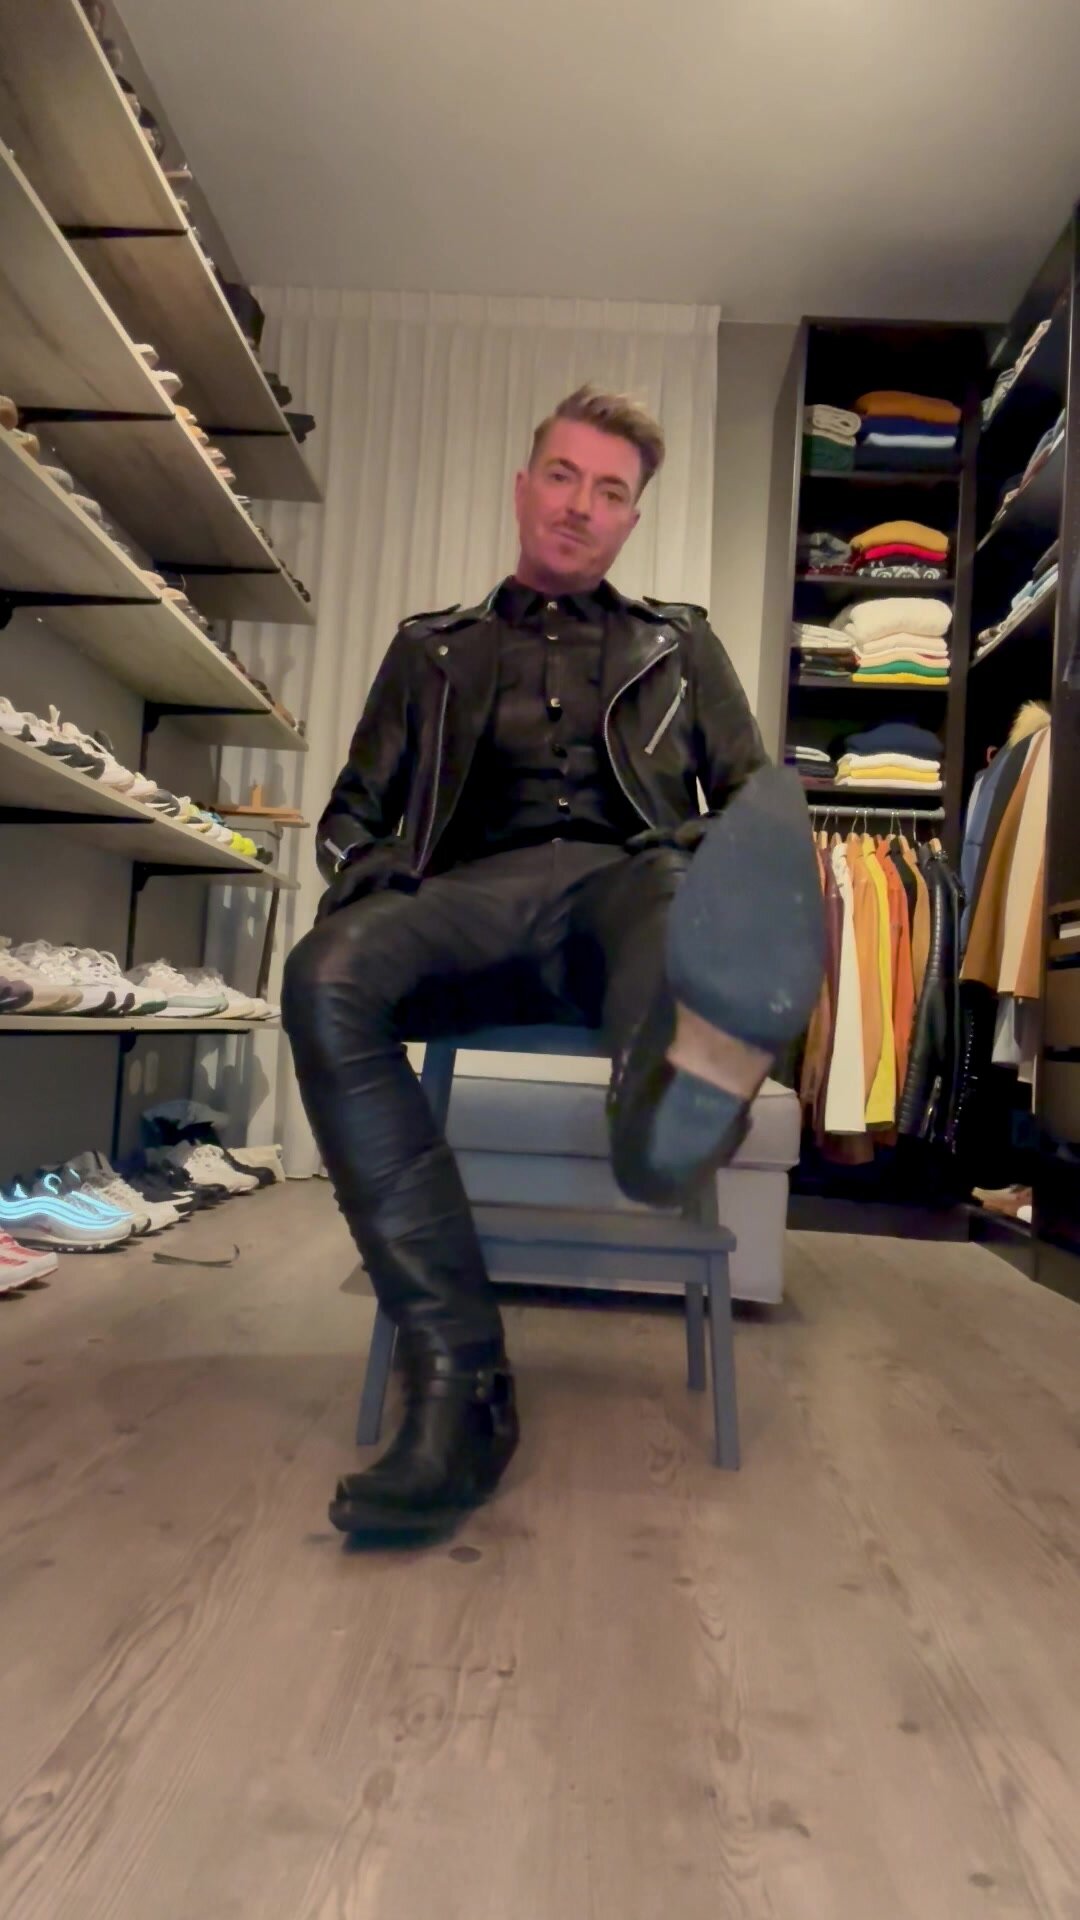 Lick my boots - video 4